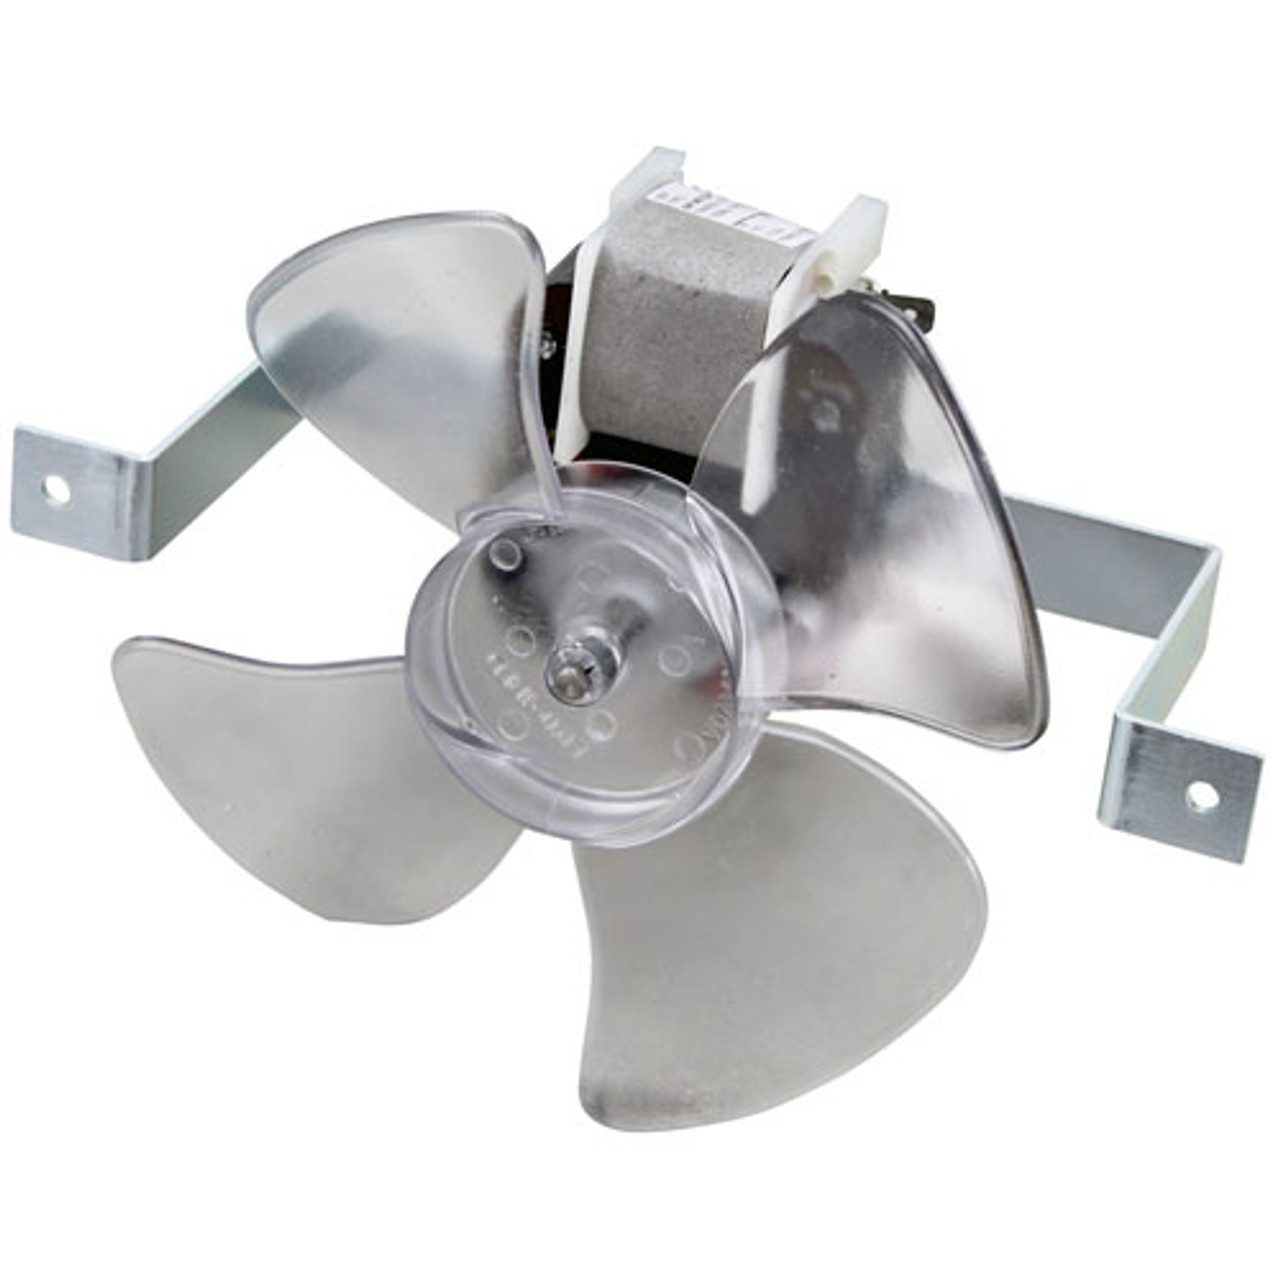 Fan Motor - Replacement Part For McCall 91577P